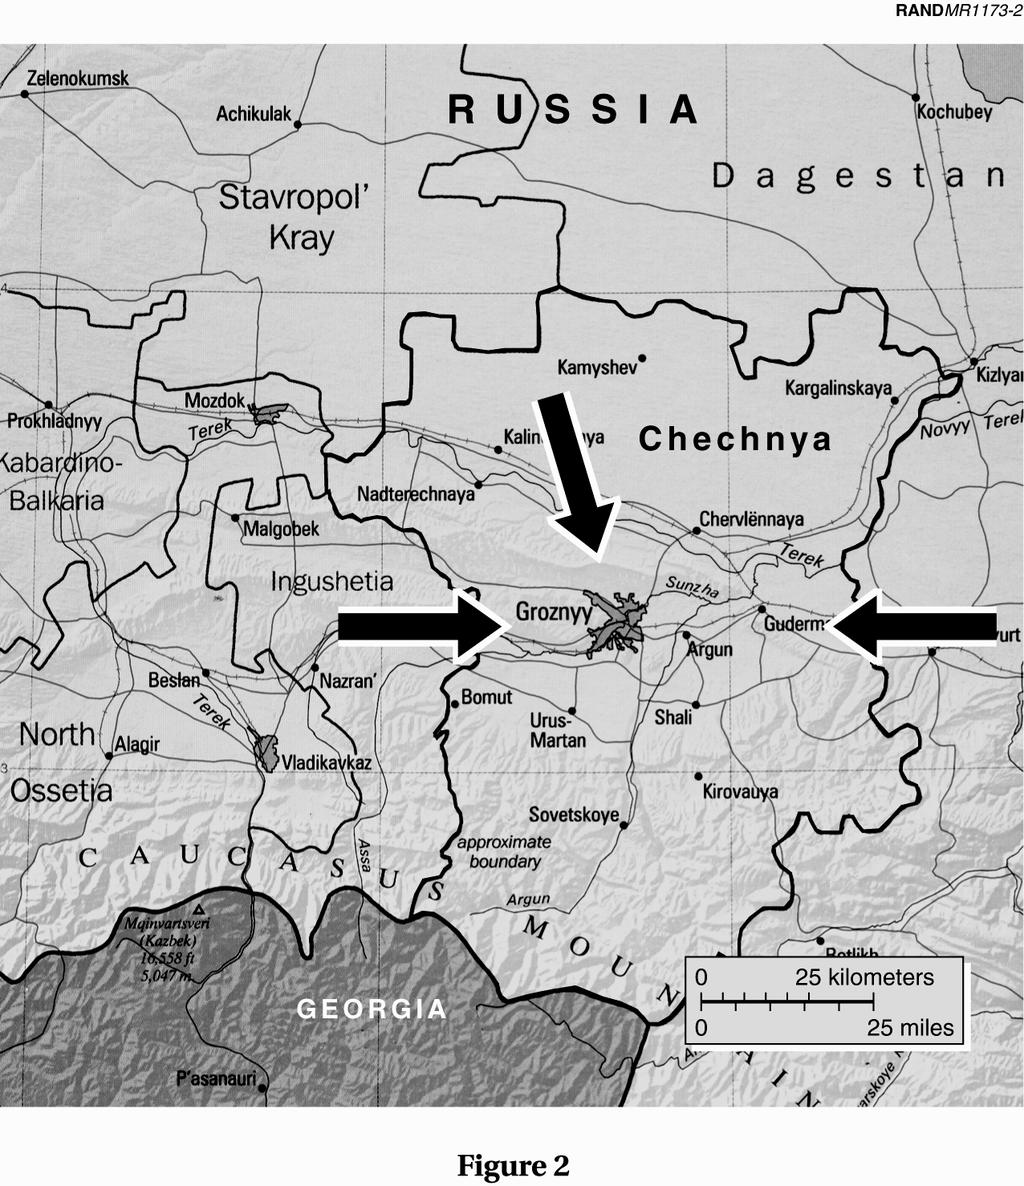 Case Studies 25 Figure 2 Russian Axes of Advance into Chechnya (1994) After the devastating losses of January 1 3, the Russians adjusted their tactics.